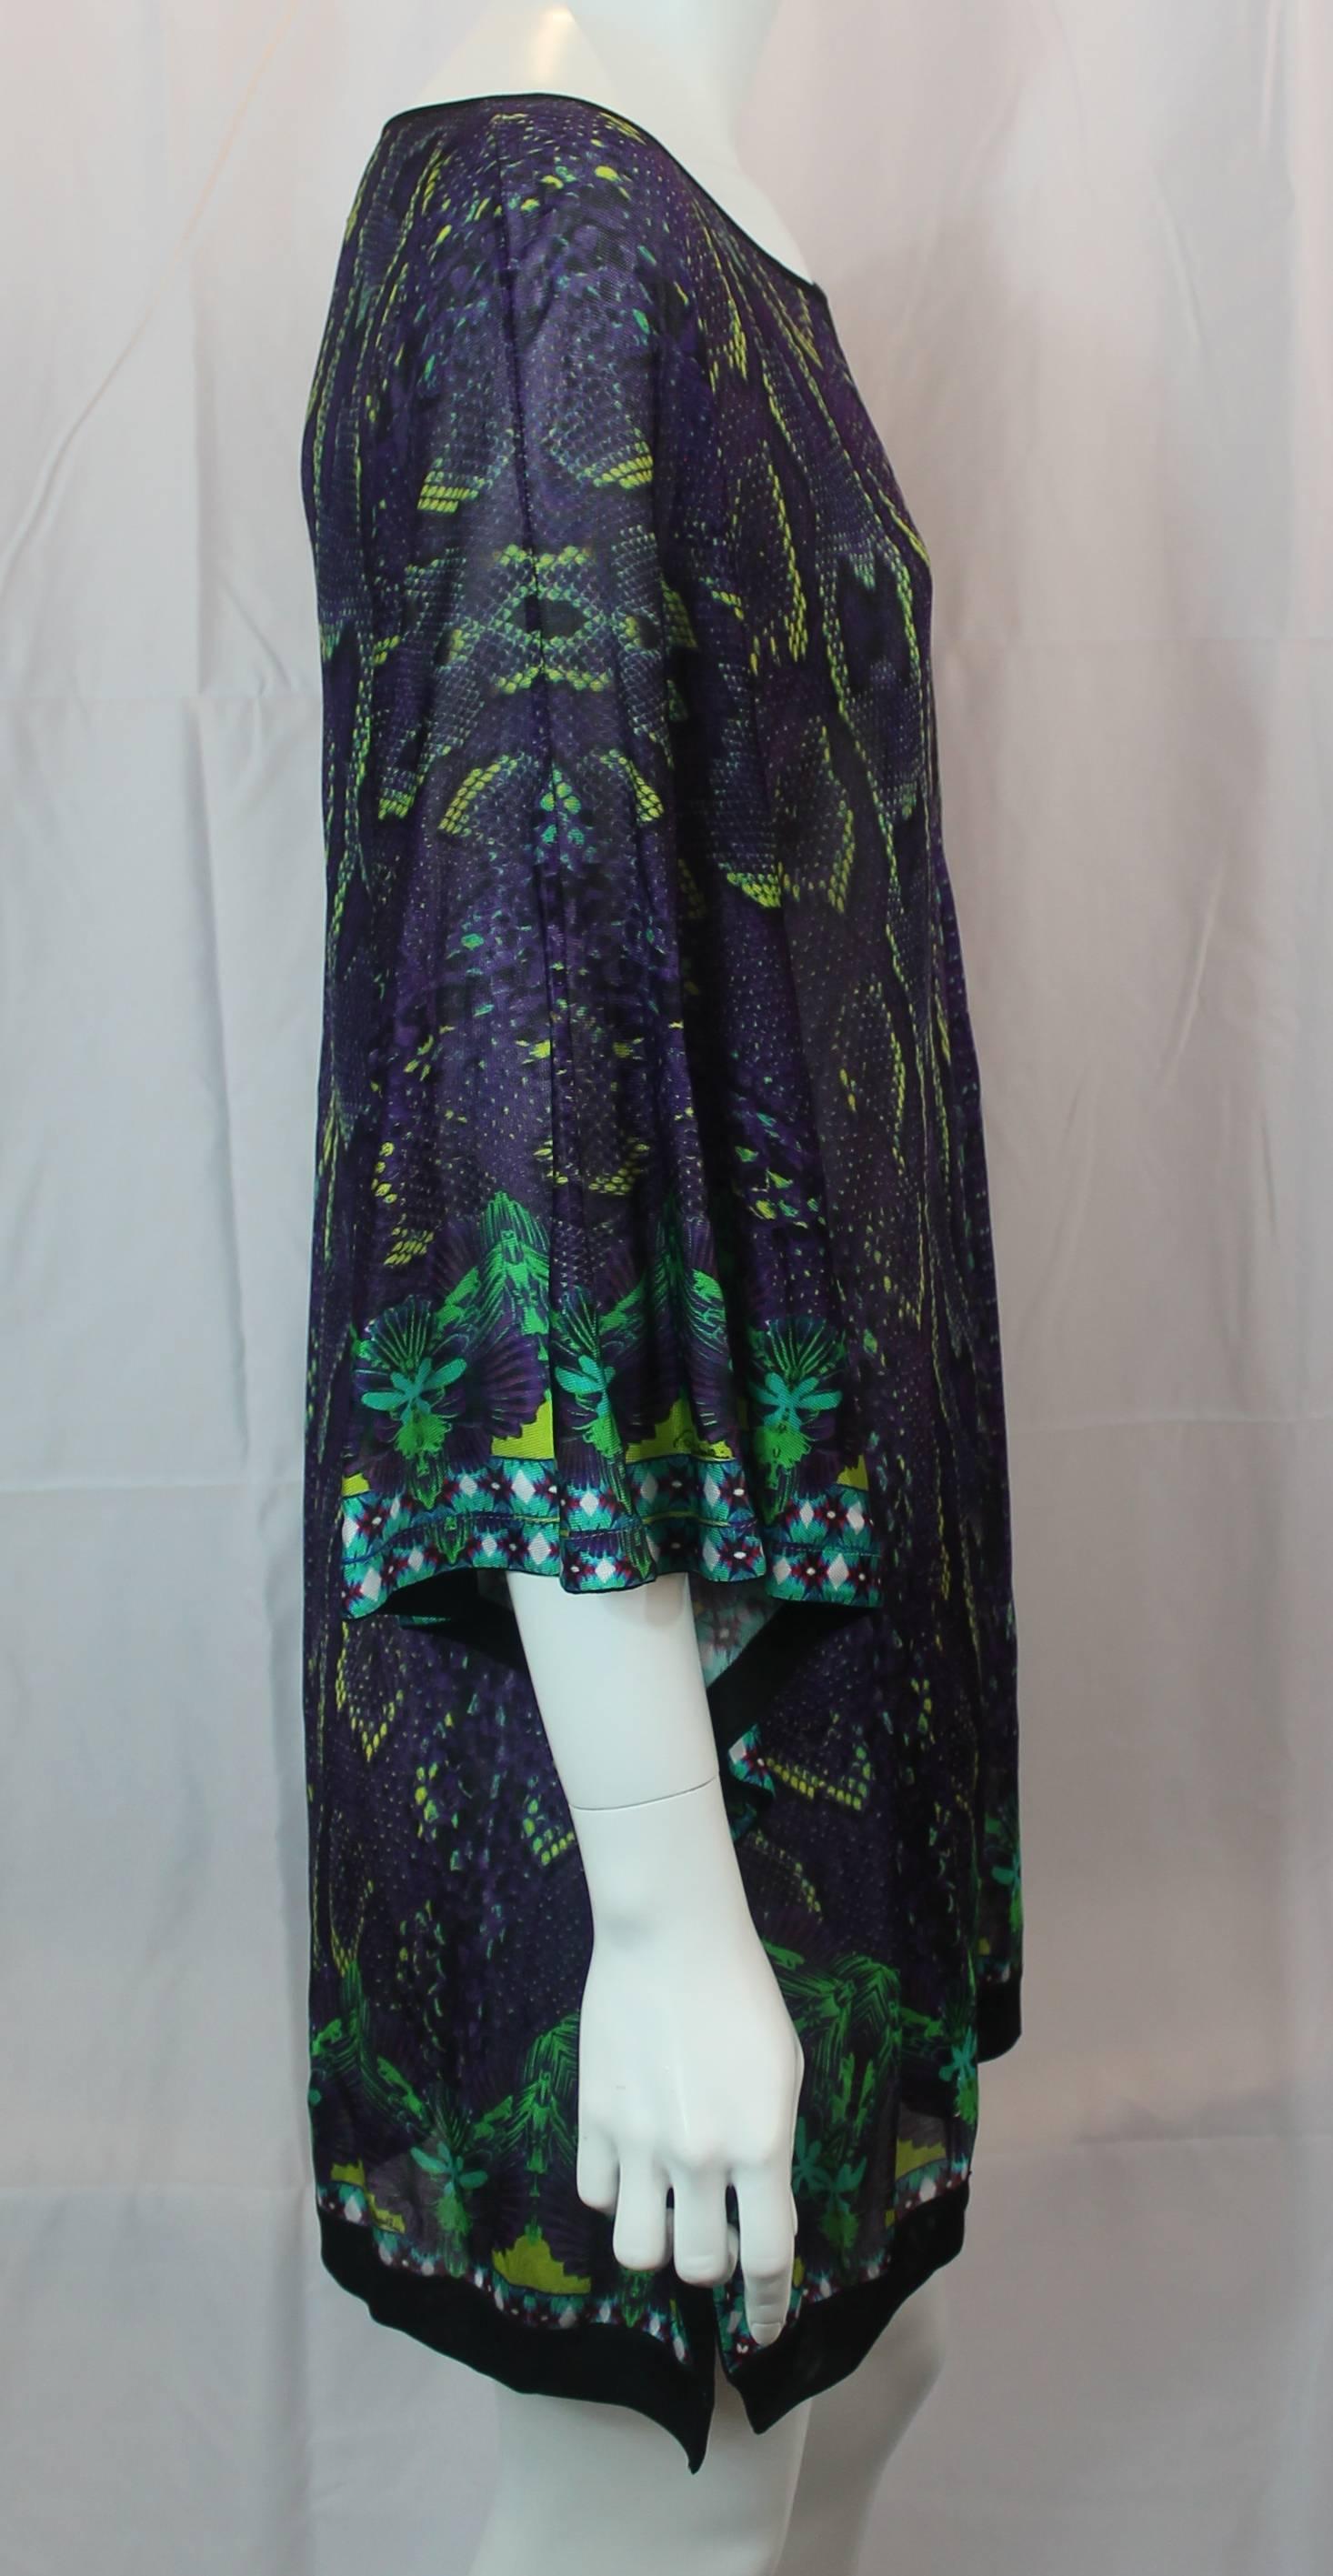 Green Roberto Cavalli Purple and Lime Snake Printed Knit Oversize Tunic Top - M